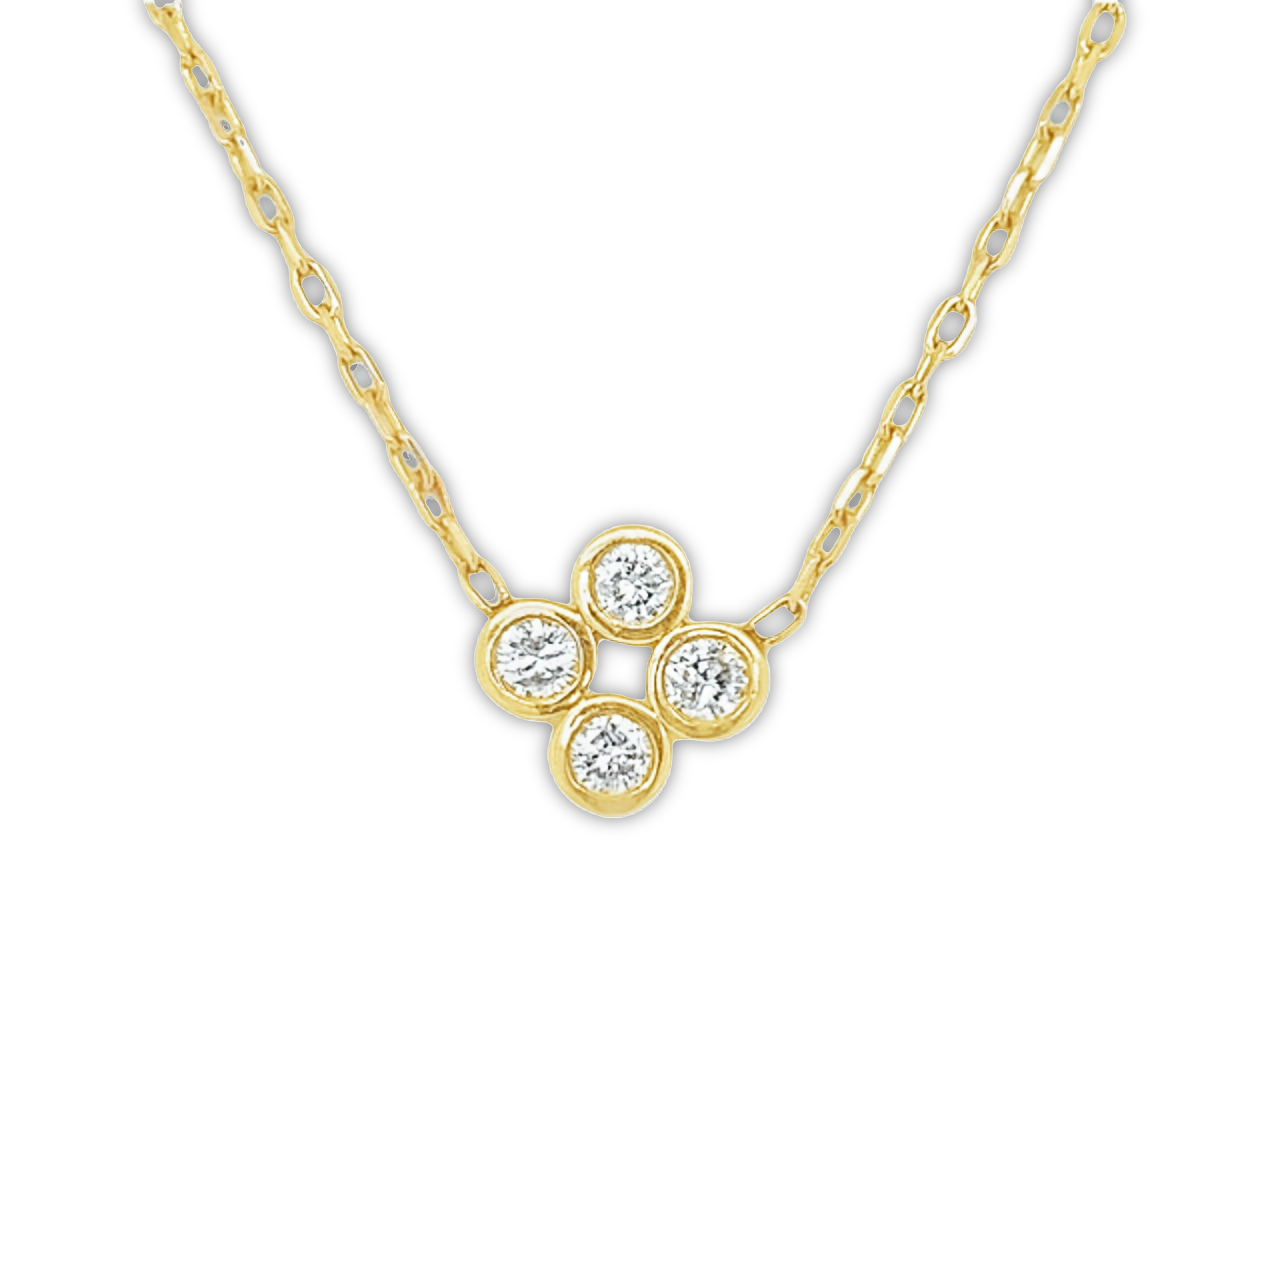 Featured image for “Bezeled Diamond Clover Necklace”